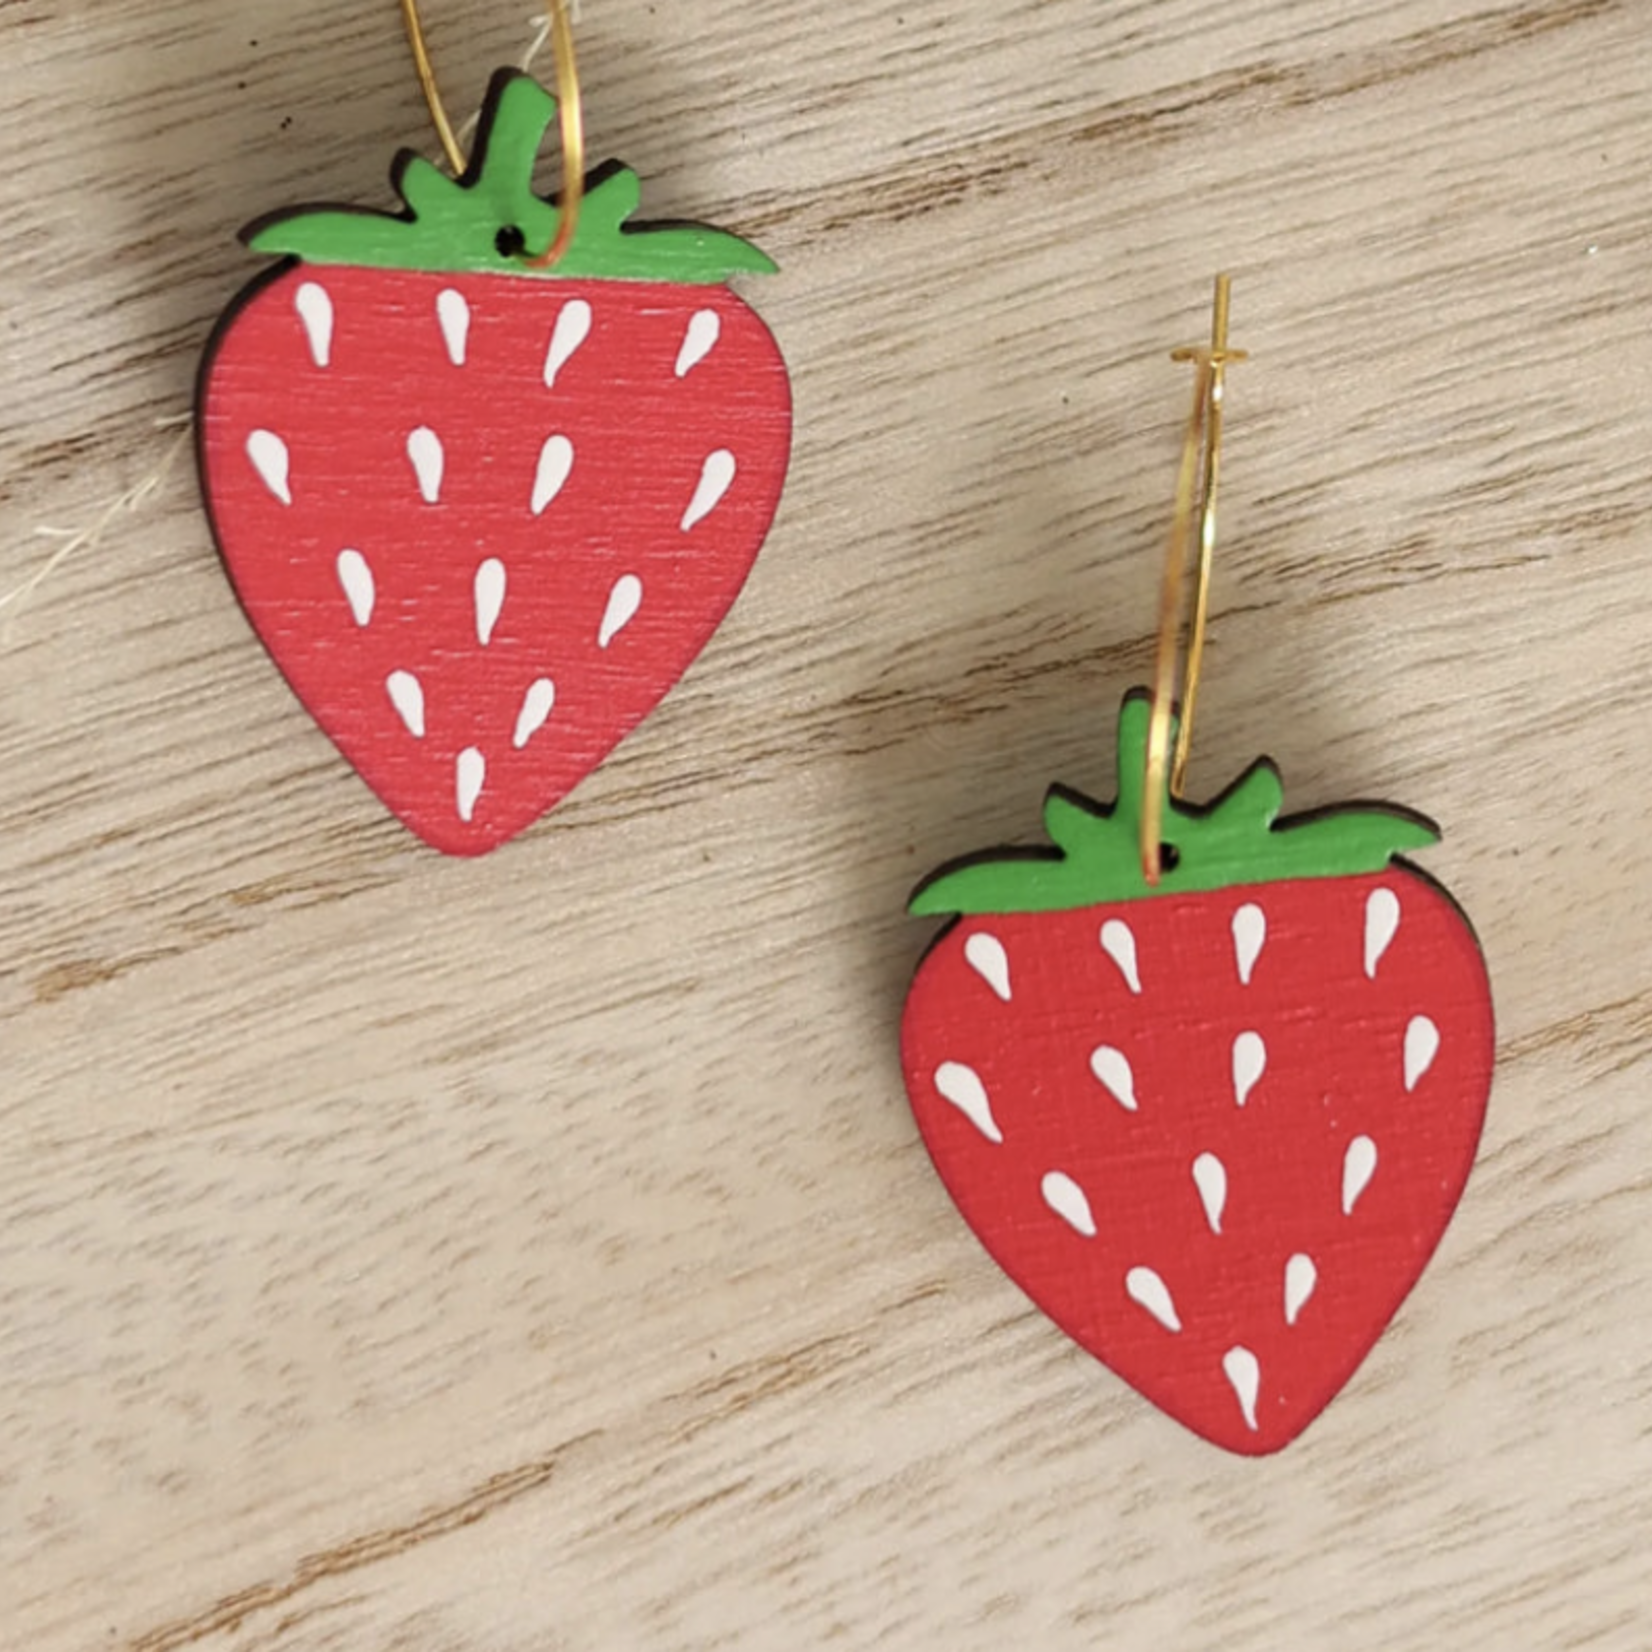 Le Chic Miami c/o Faire Strawberry Hoop Earrings by Le Chic Miami